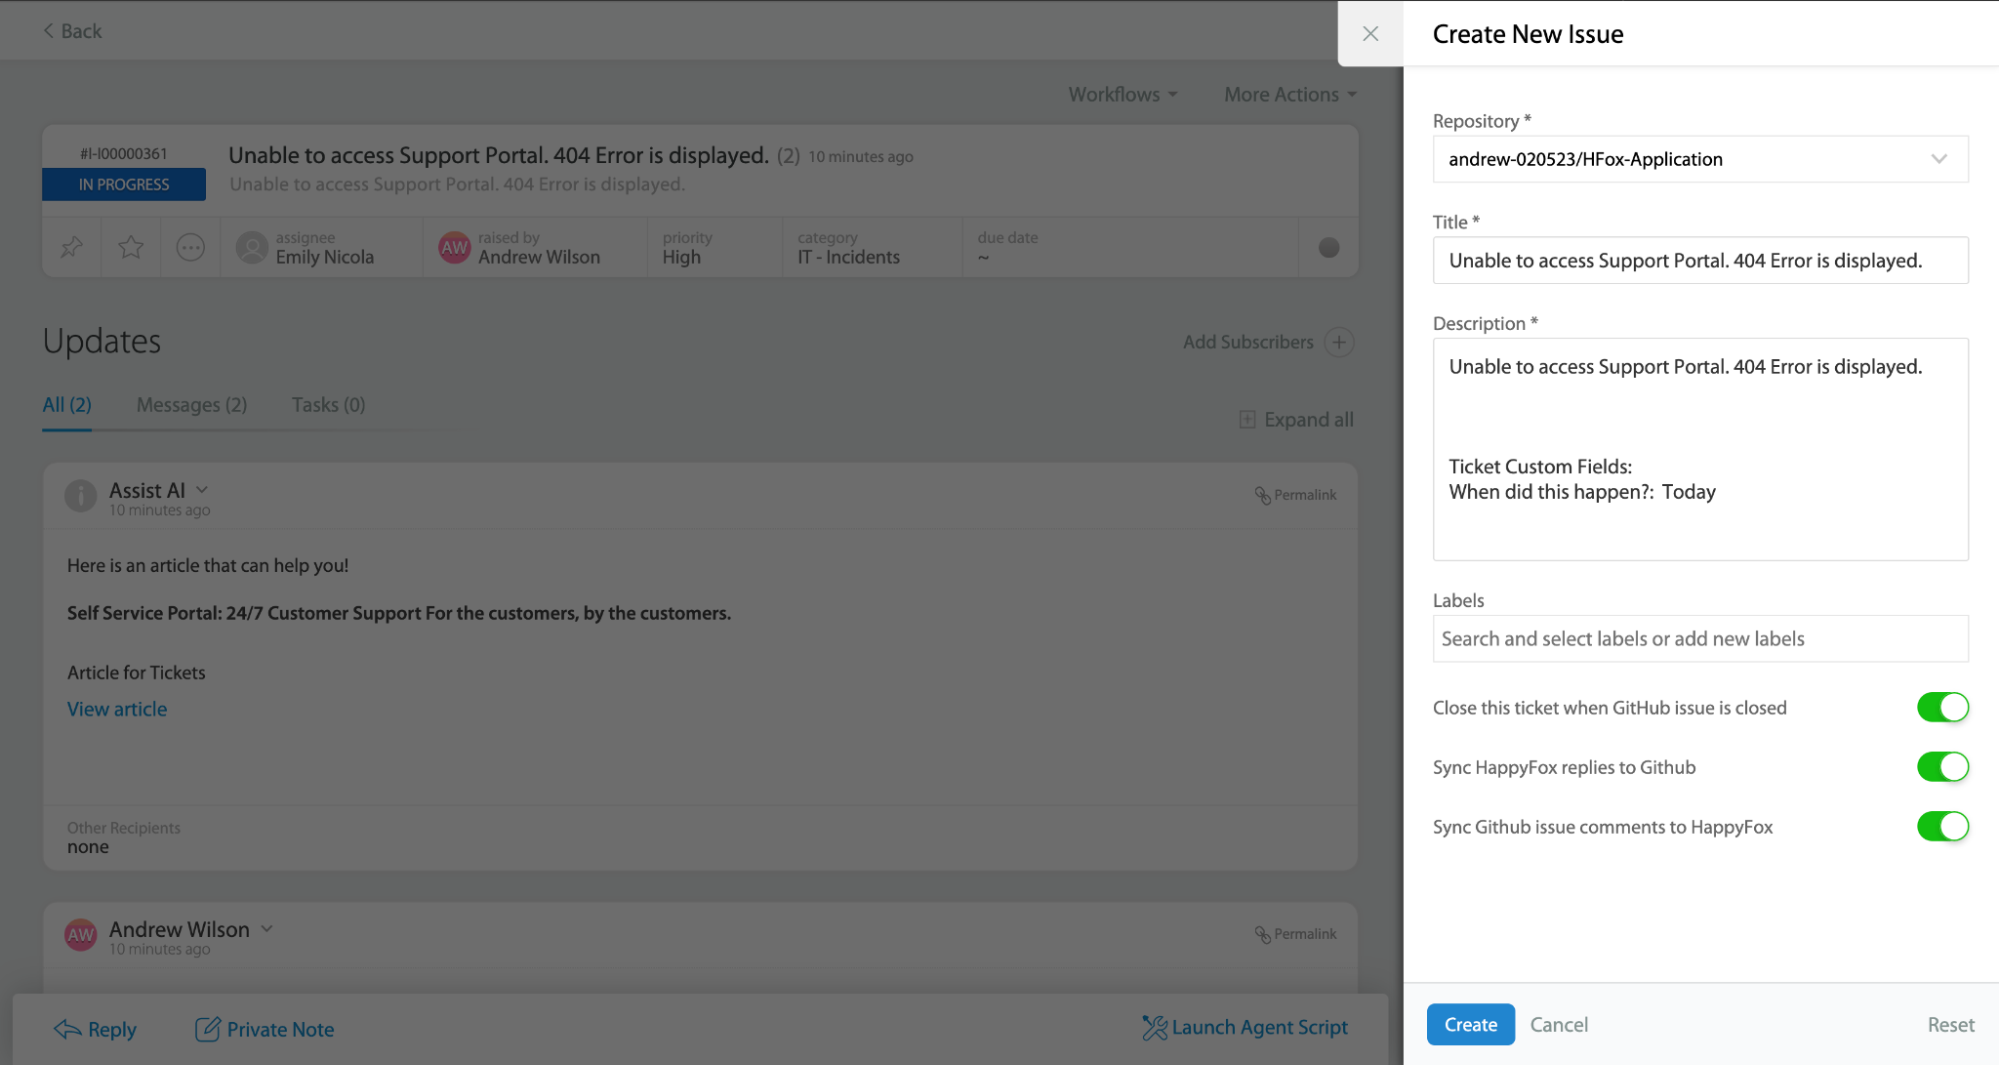 Create, link, and track issues in GitHub from within the Service Desk